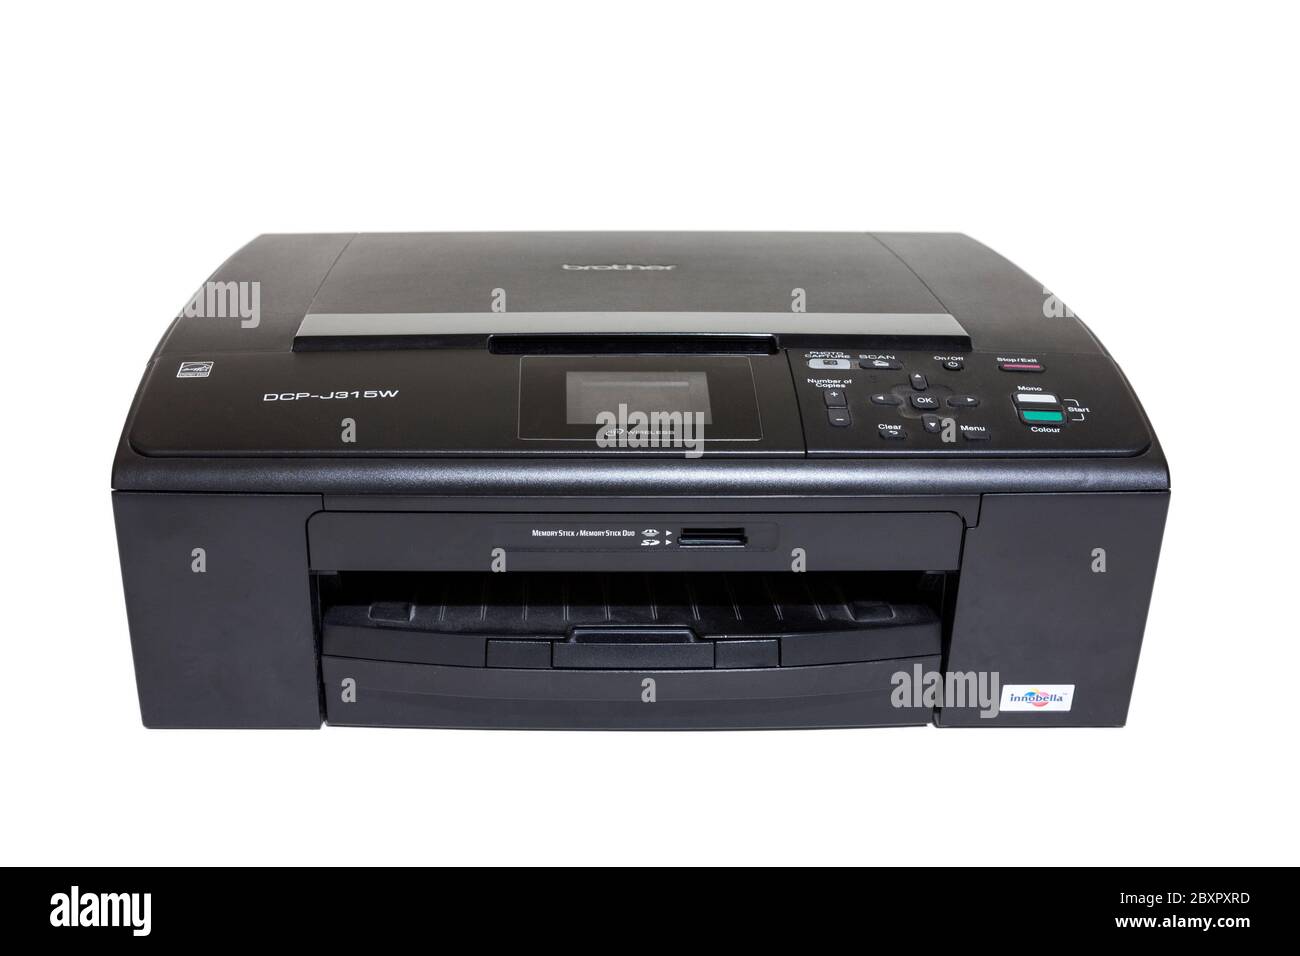 An old and used Brother DCP-J315W colour printer and scanner or multi-functional device (MFD) for home or small office use Stock Photo